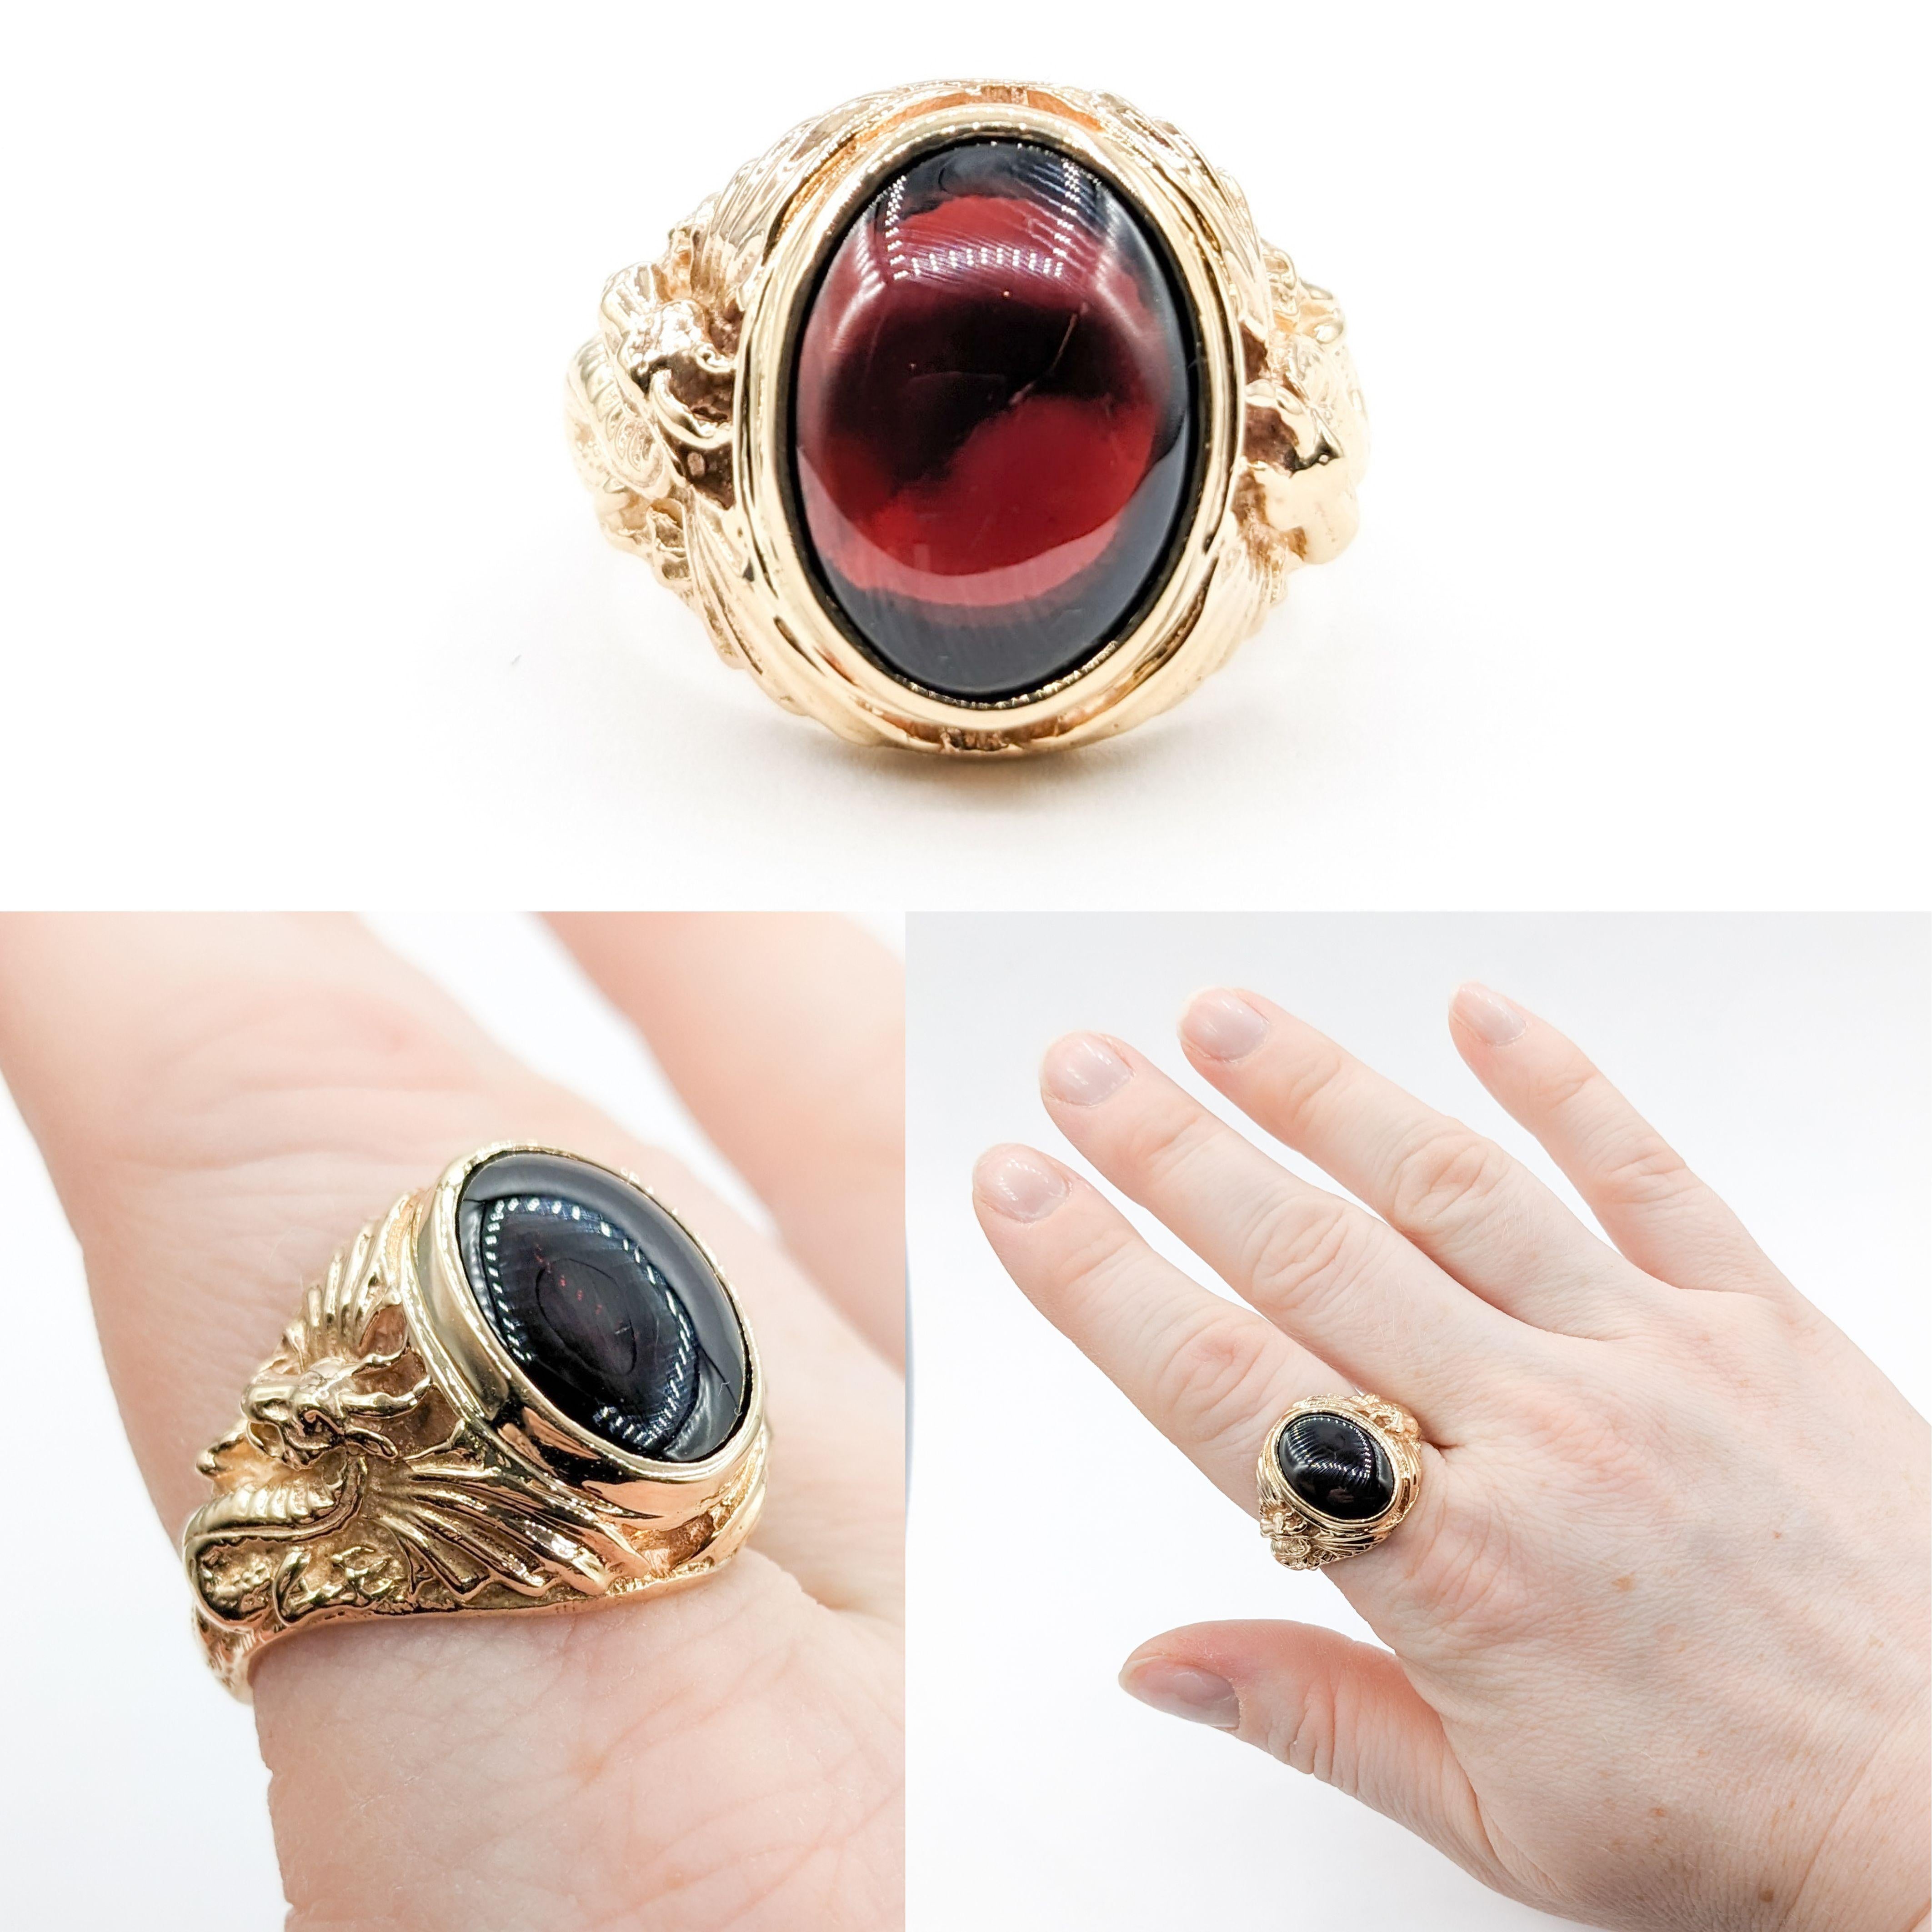 Garnet Ring With a Dragon Motif & Large Cabochon Garnet - 14k

Unveil the splendor of this exceptional Garnet Ring, with sculpted Dragons motif. Meticulously crafted in 14ky yellow gold, the ring shows stunning detail. The centerpiece of this